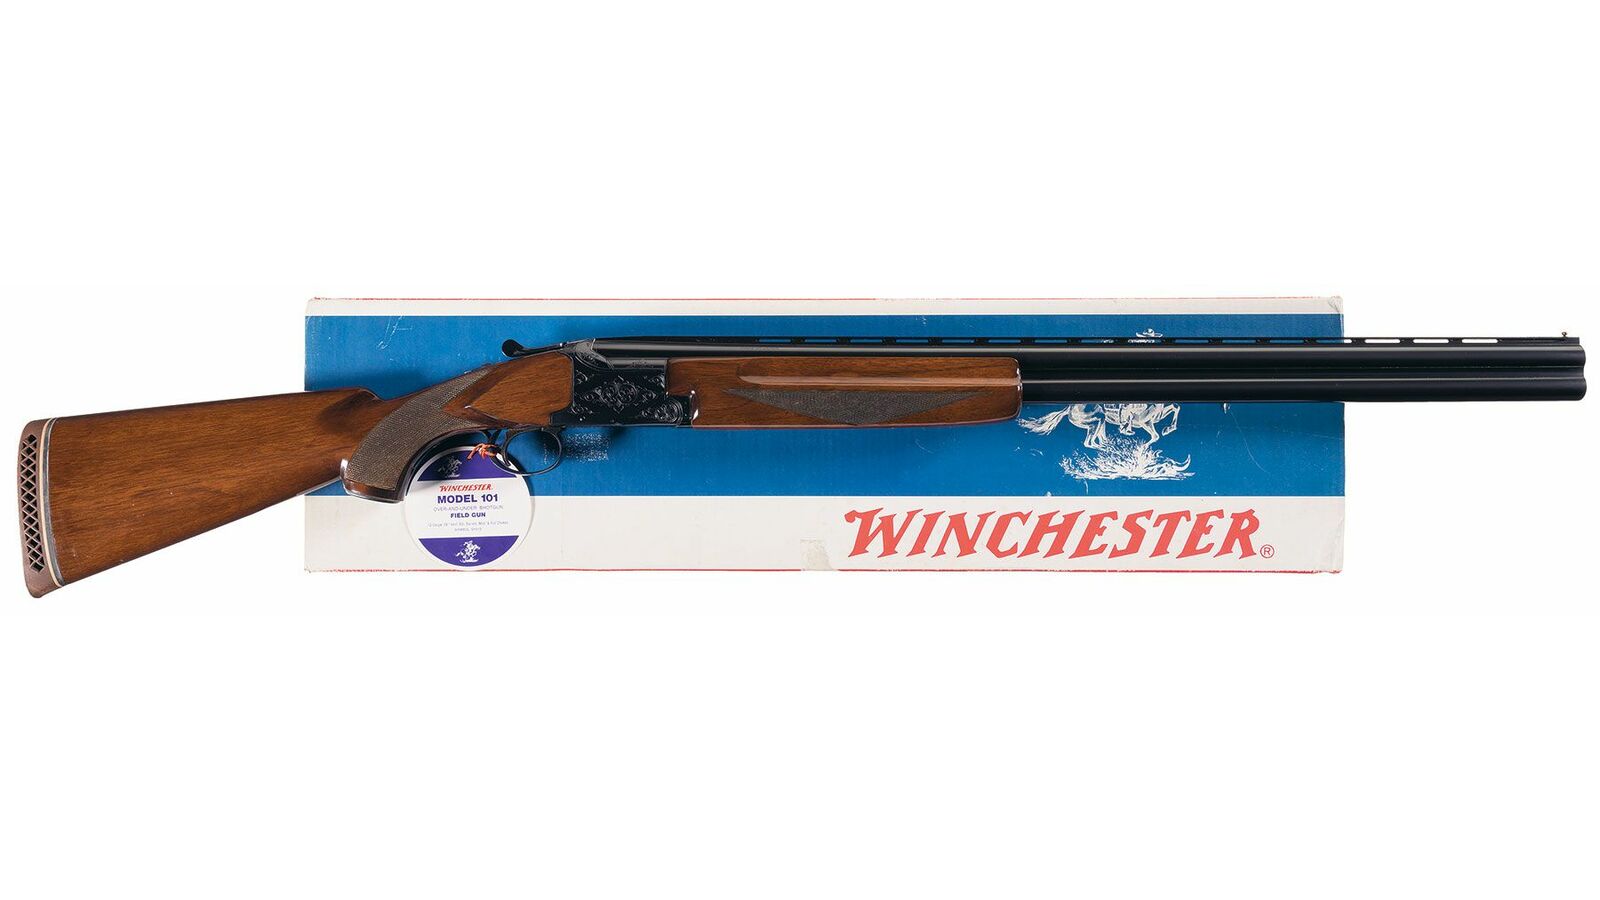 Serial shotgun numbers 101 winchester winchester age